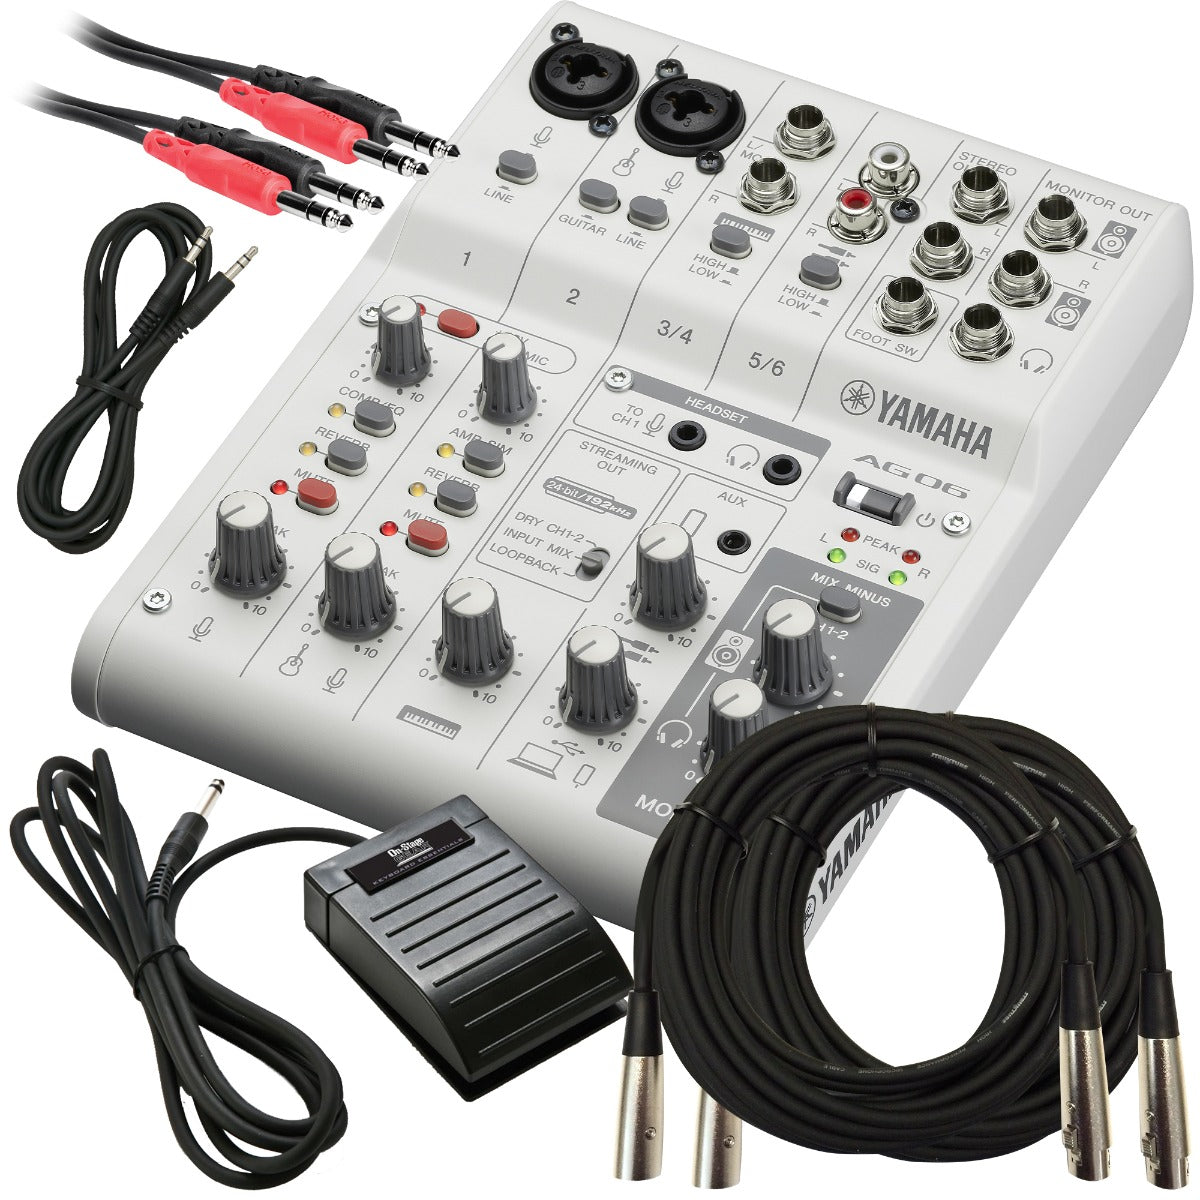 Yamaha AG06 Mk2 Live Streaming Mixer and USB Audio Interface - White CABLE  KIT